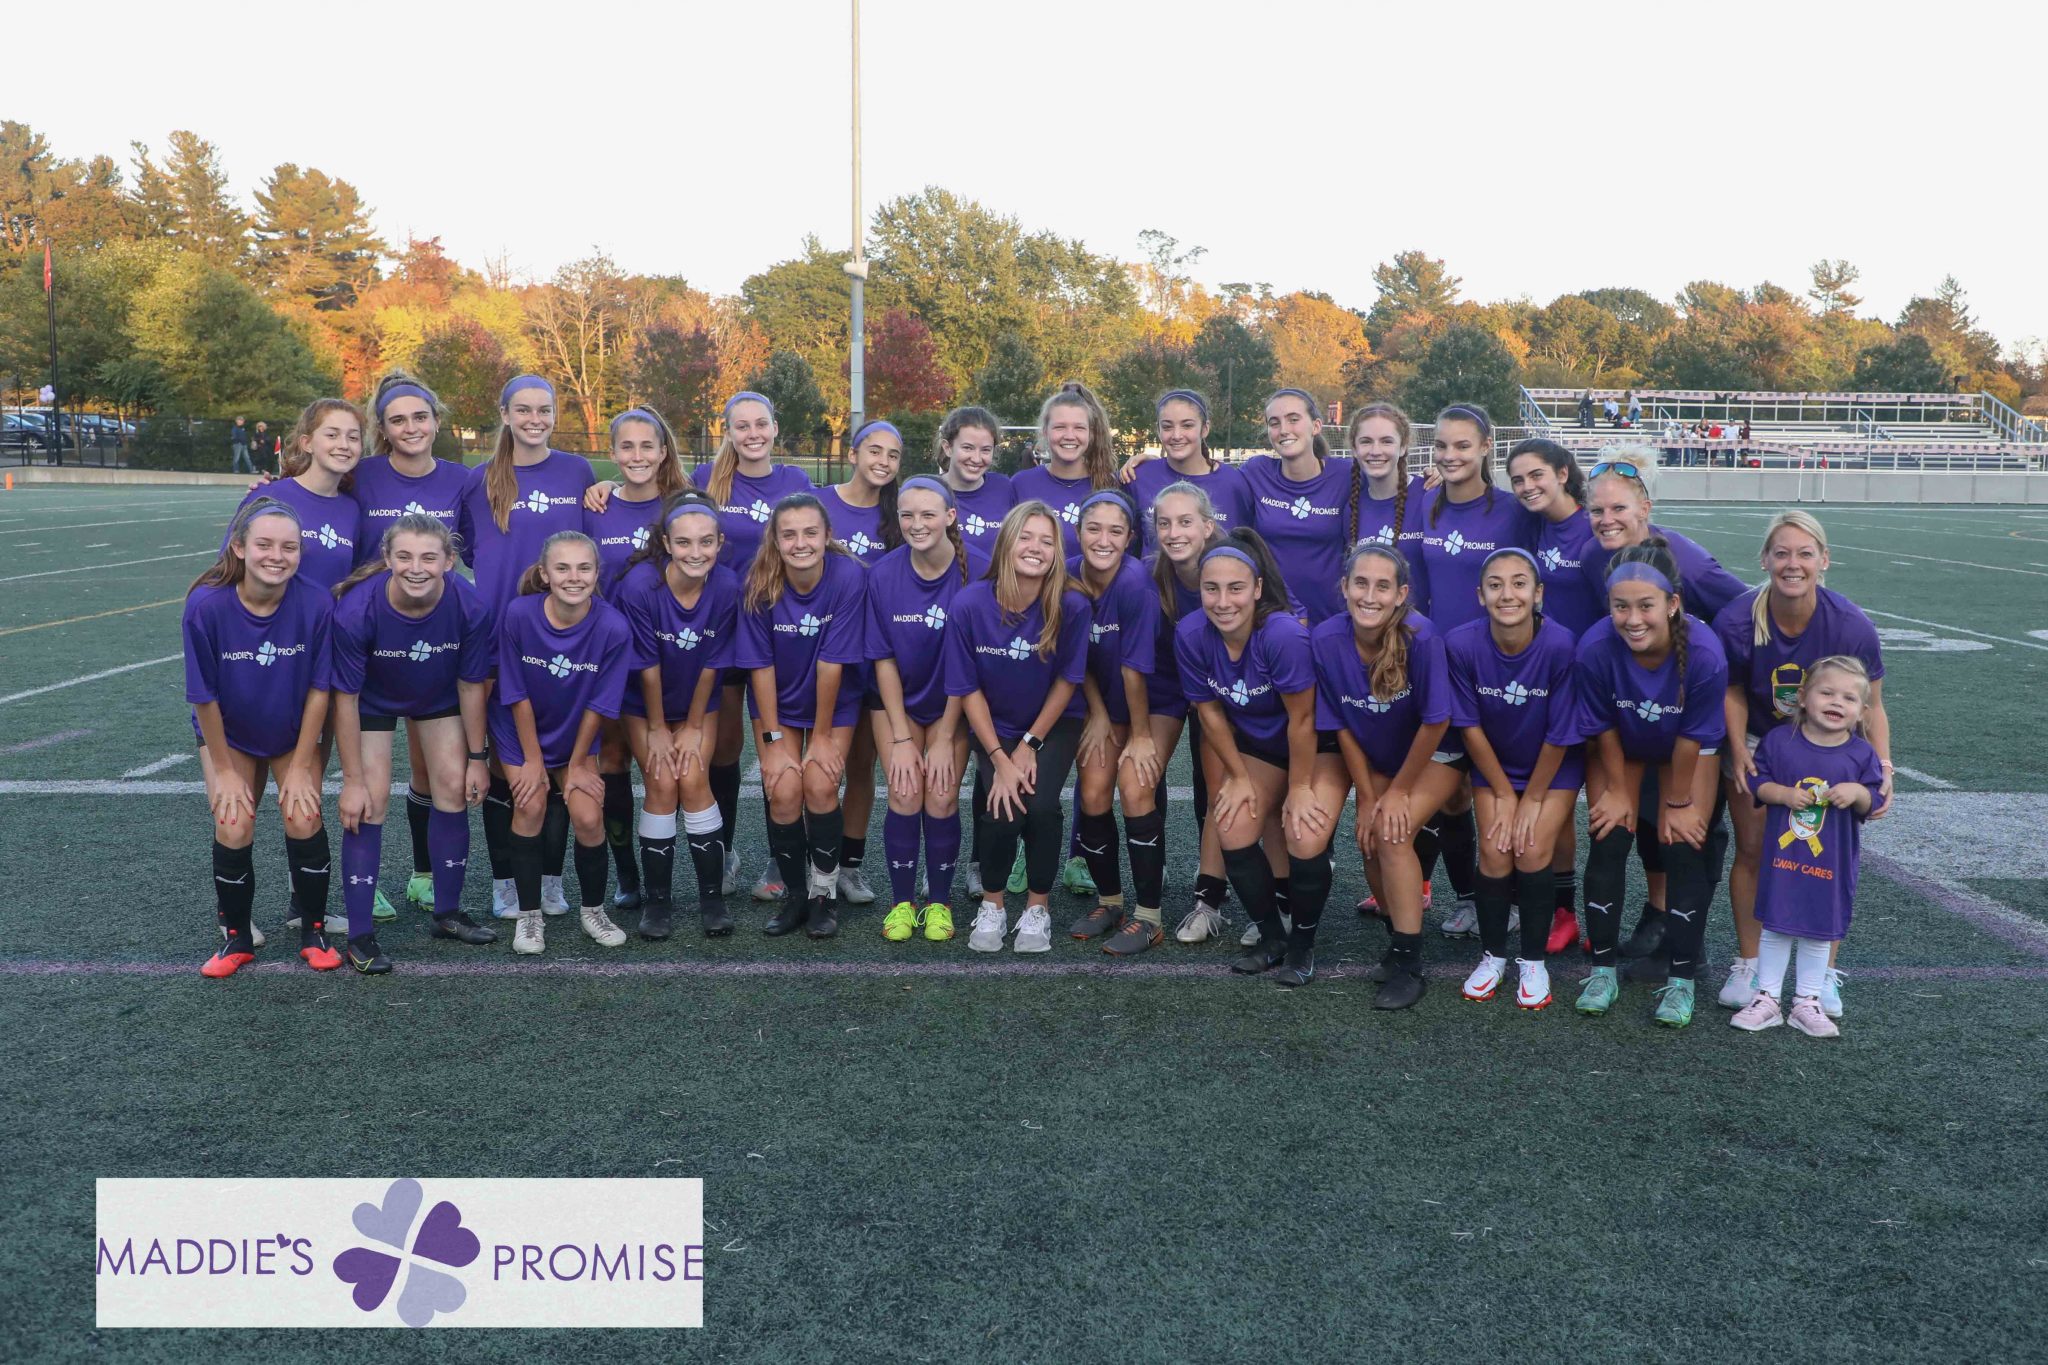 2021 Hingham High School Girls Soccer team poses for a photo with their Maddie's Promise T-shirts.